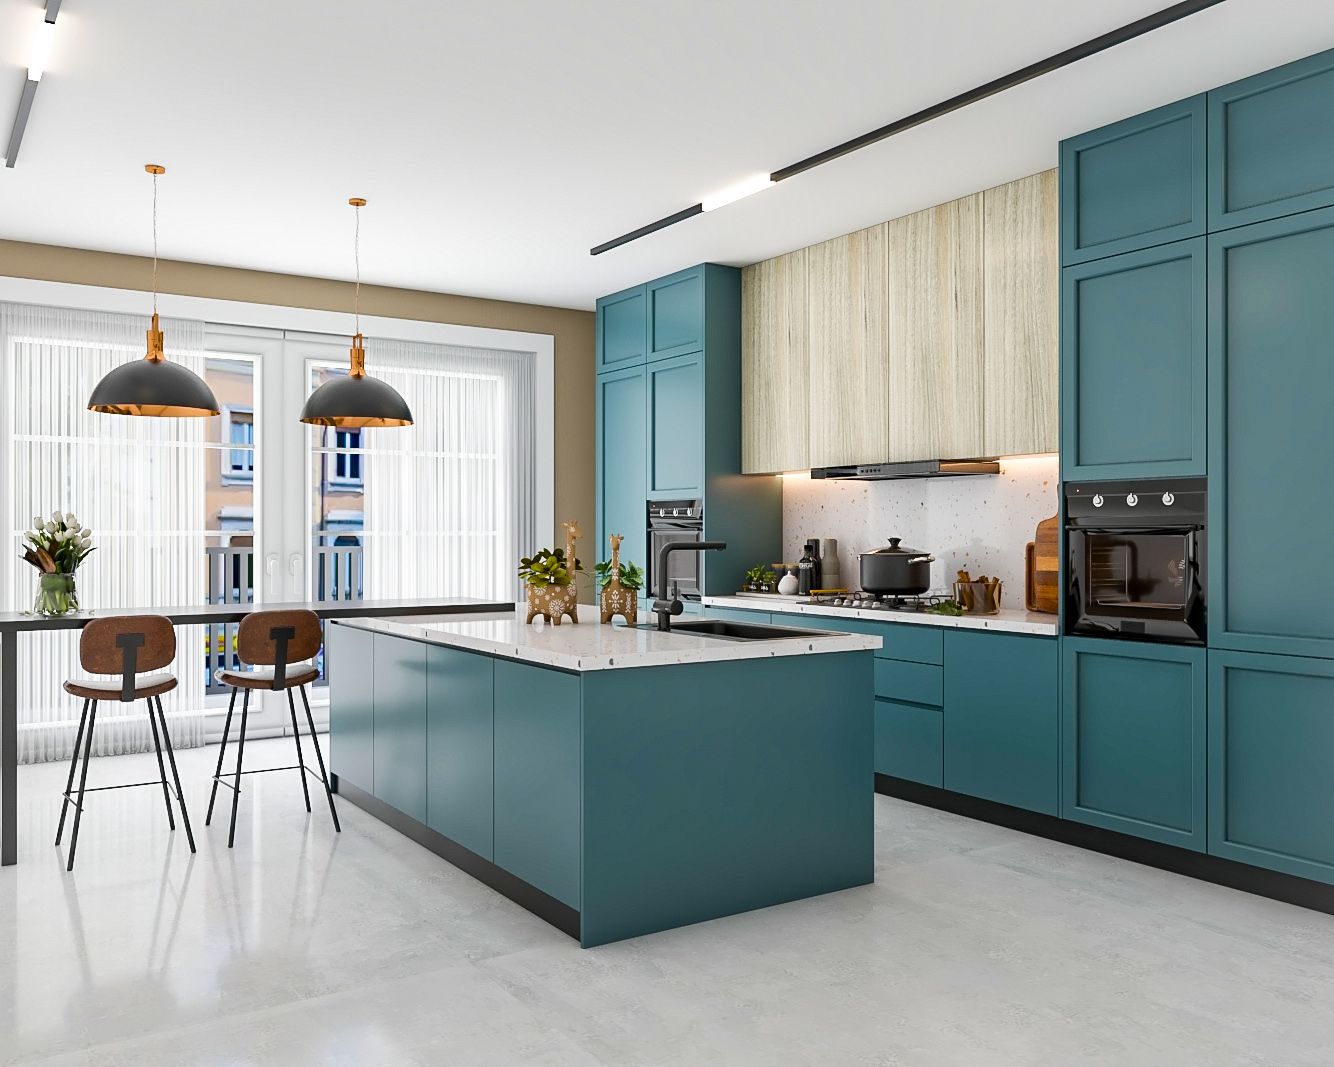 Contemporary Island Kitchen Design With Teal Blue And Wood Cabinets